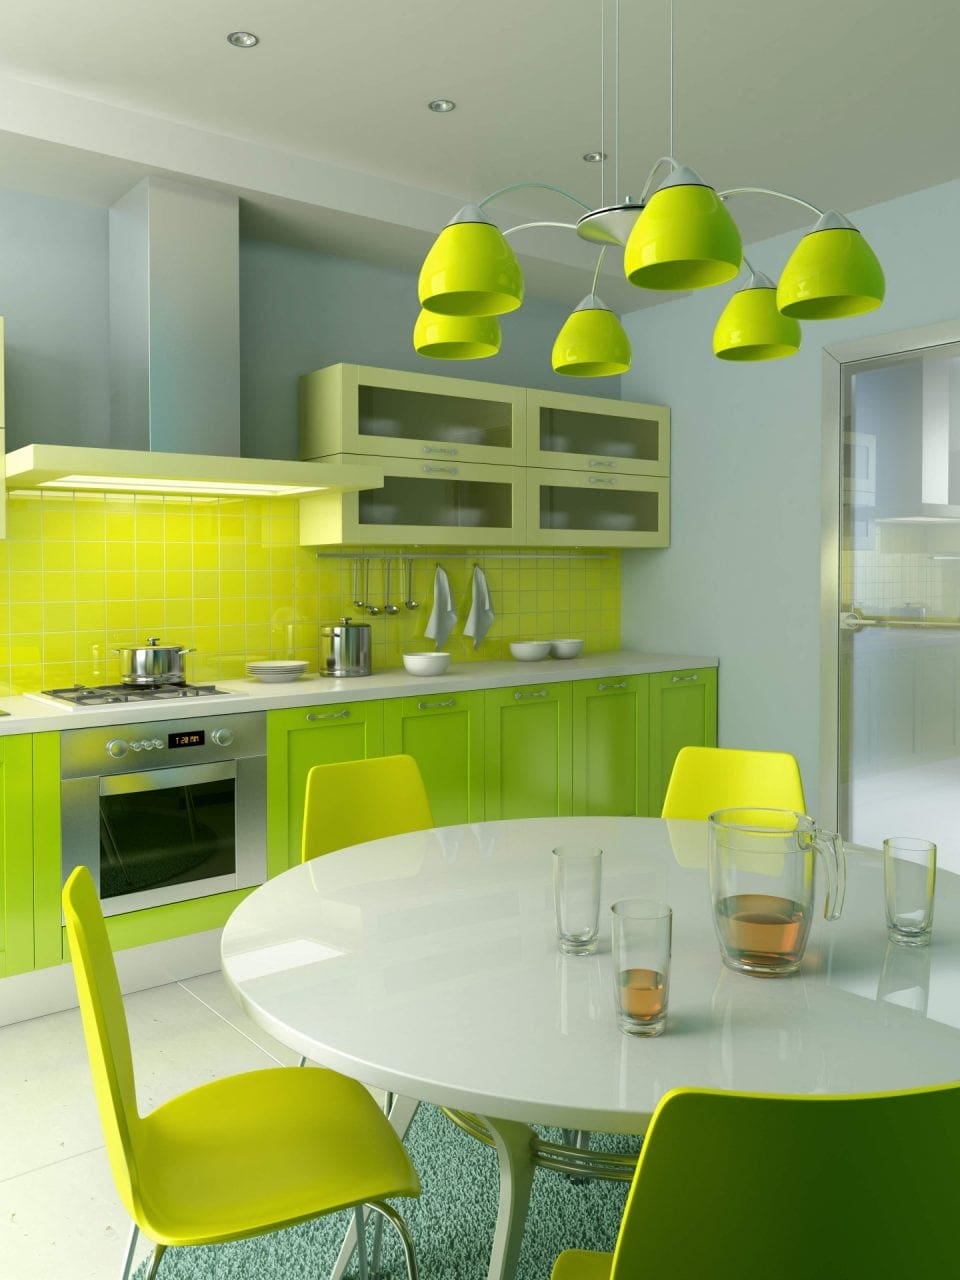 spectacular colorful apartment decoration kitchen furnishing ideas with gloss acrylic green kitchen cabinets and rounded white acrylic breakfast table sets spectacular - Imobiliare.ro: Interesul pentru apartamente noi s-a triplat in patru ani